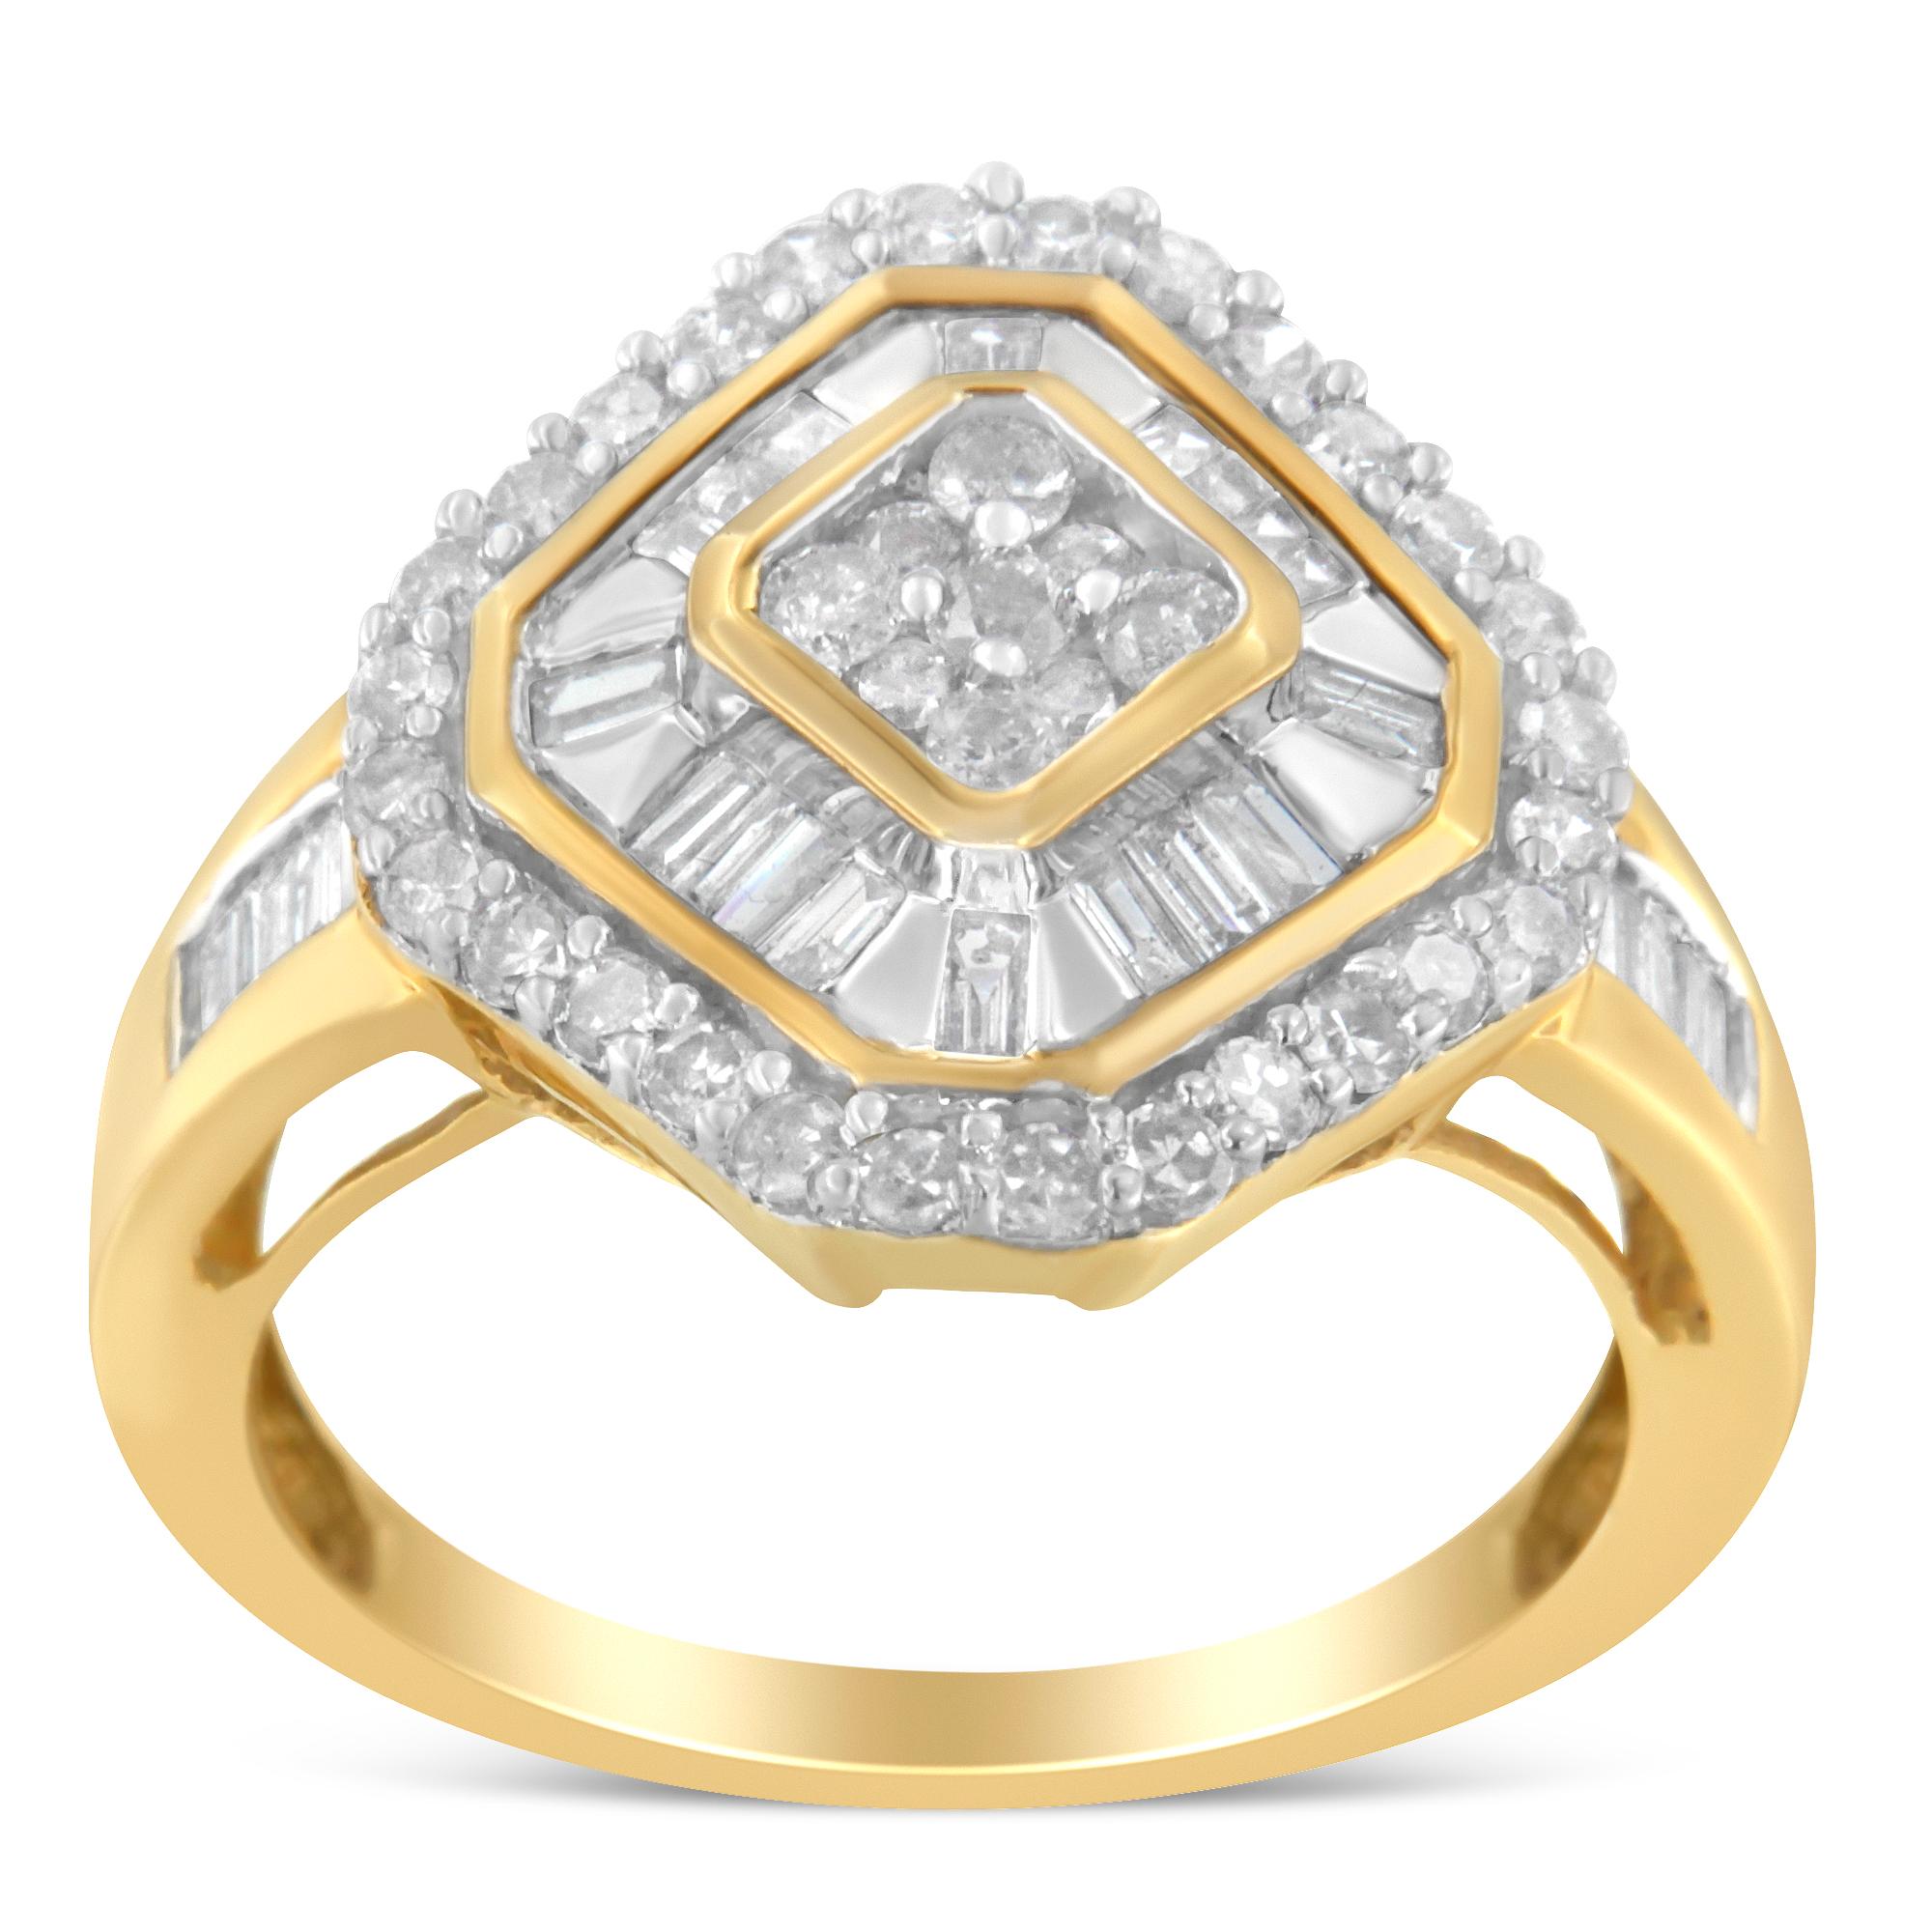 For Sale:  10K Yellow Gold 1.0 Carat Diamond Cocktail Ring 3